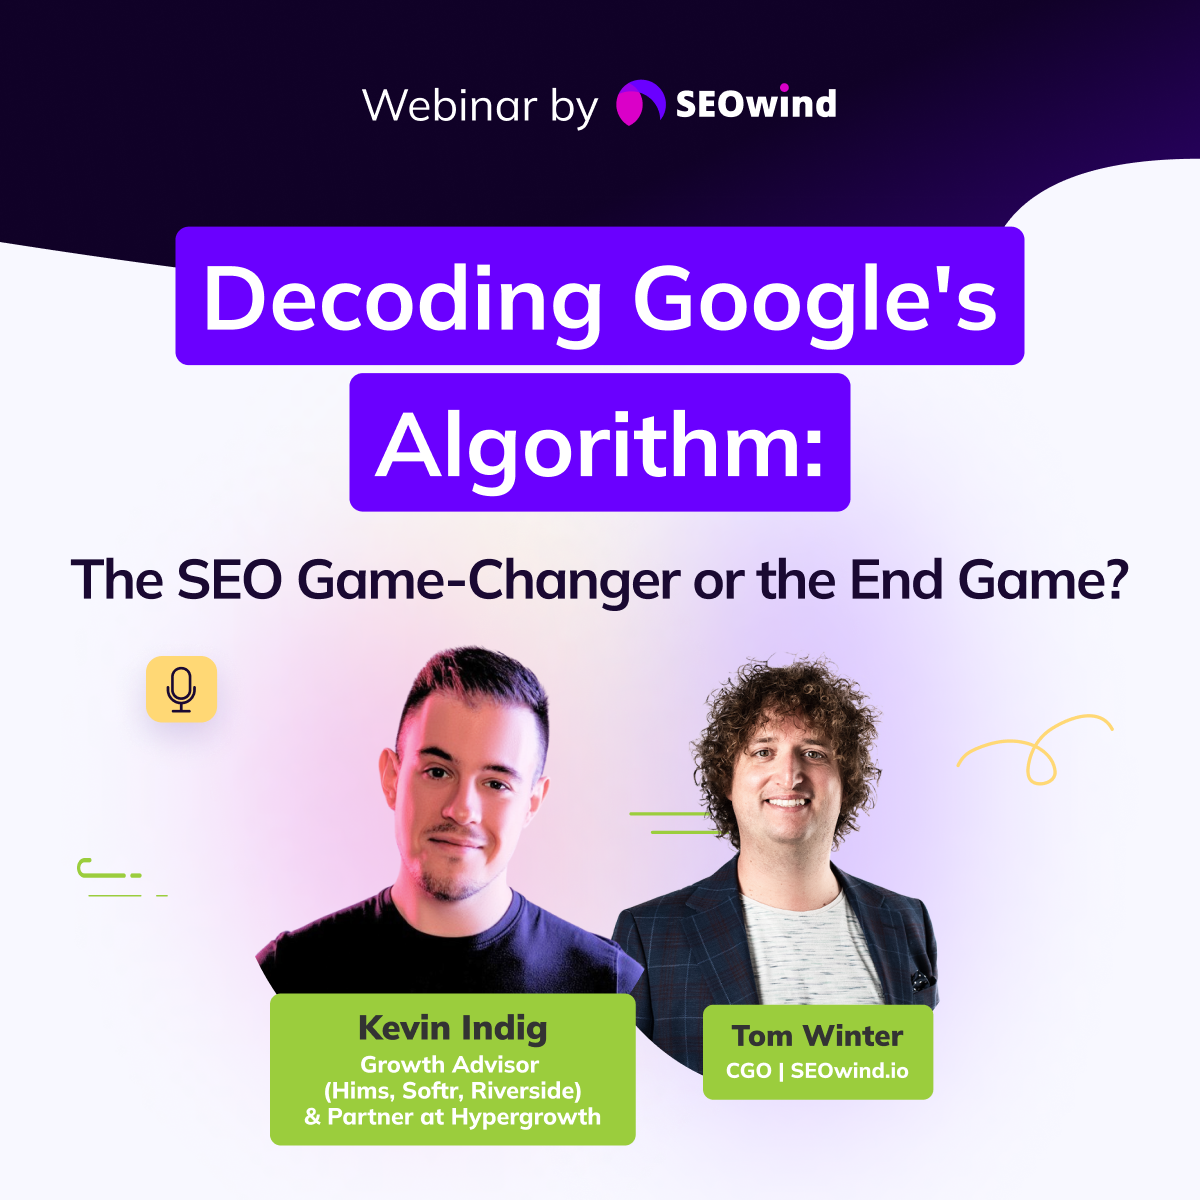 Decoding Google's Algorithm: The SEO Game-Changer or the End Game? with Kevin Indig